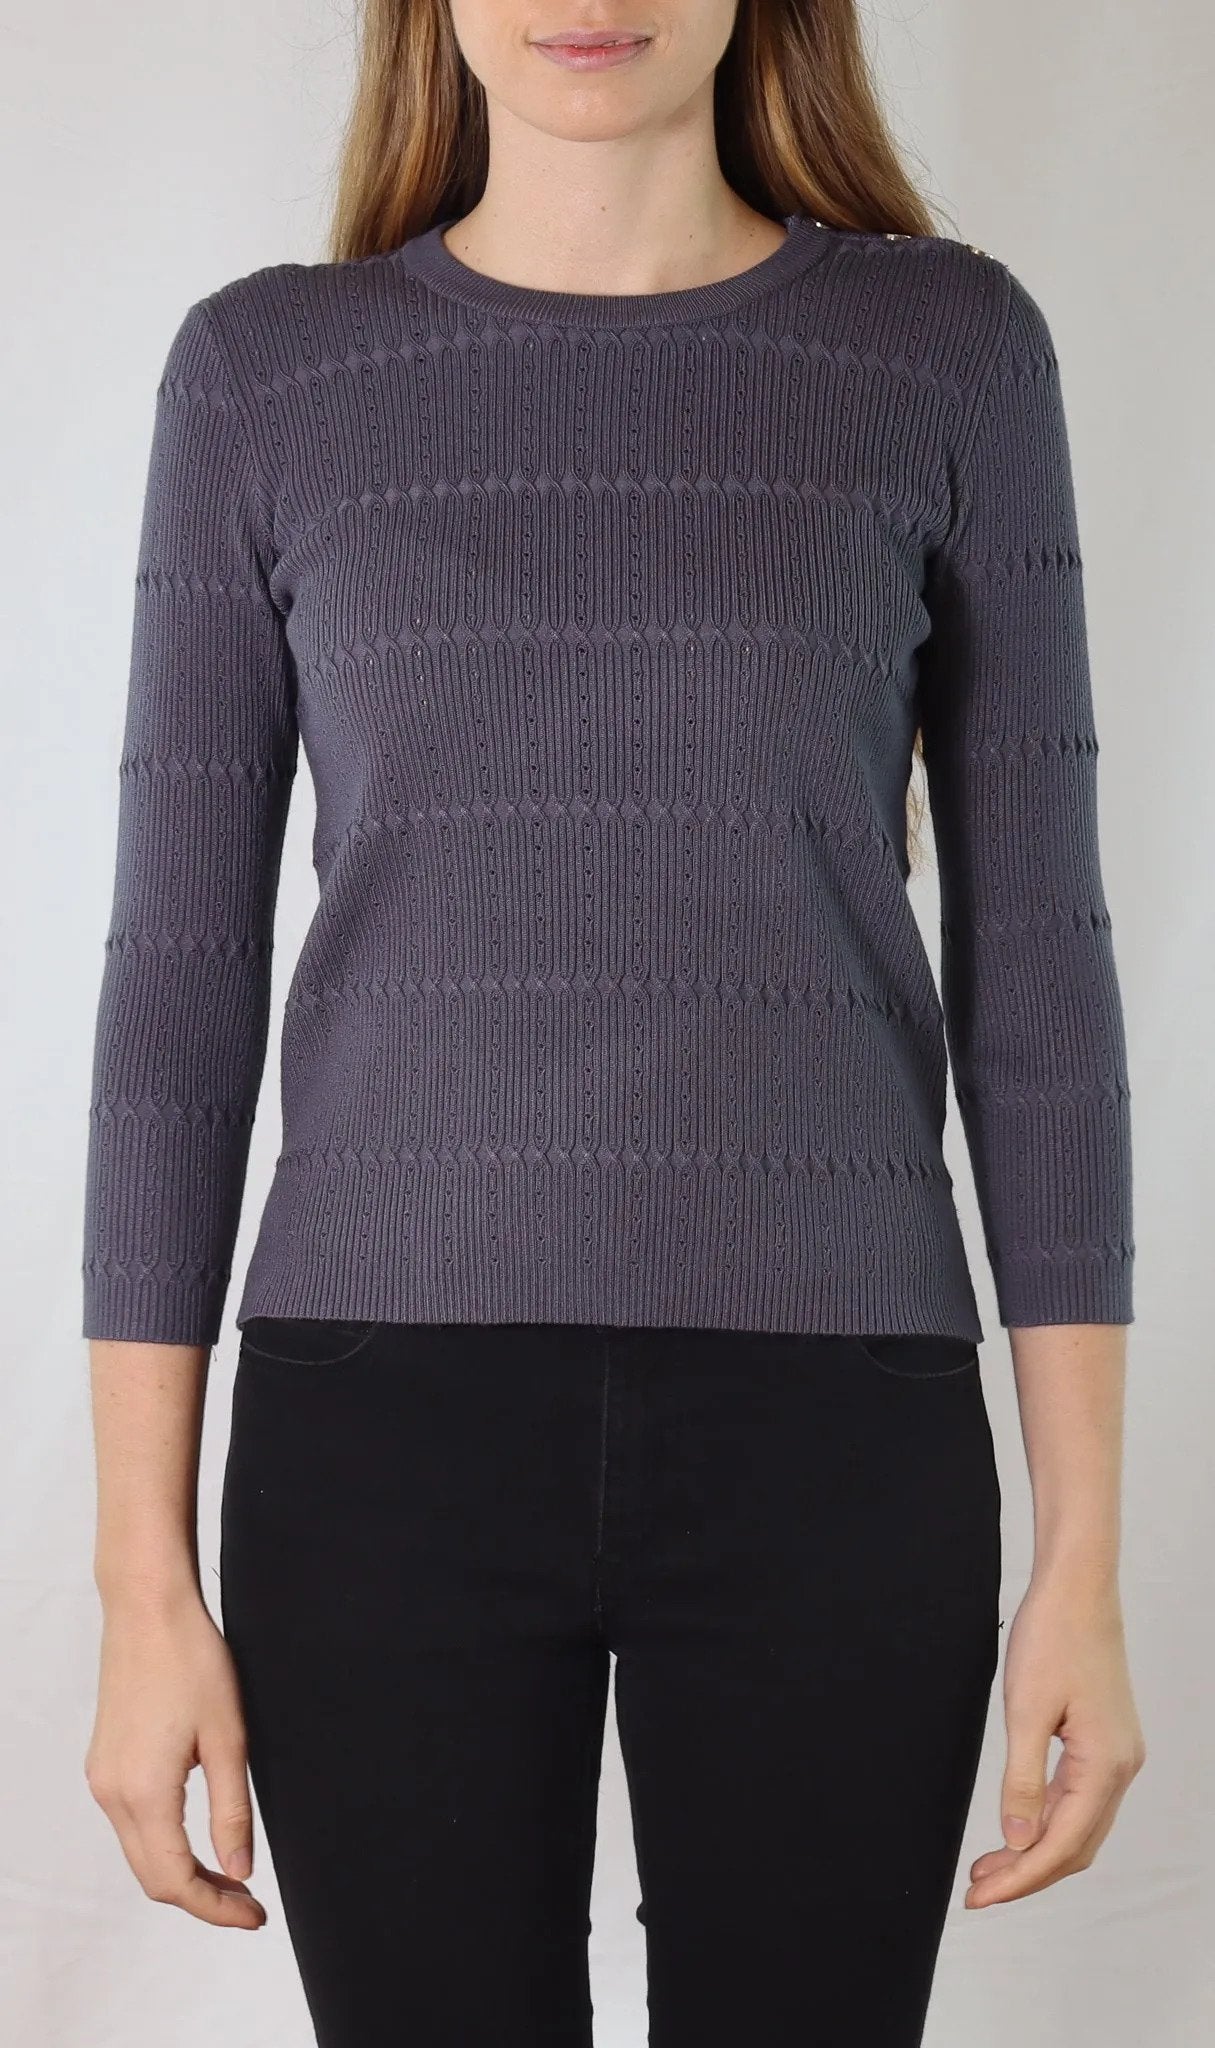 Metric Knits Pointelle Crew Neck sweater front.